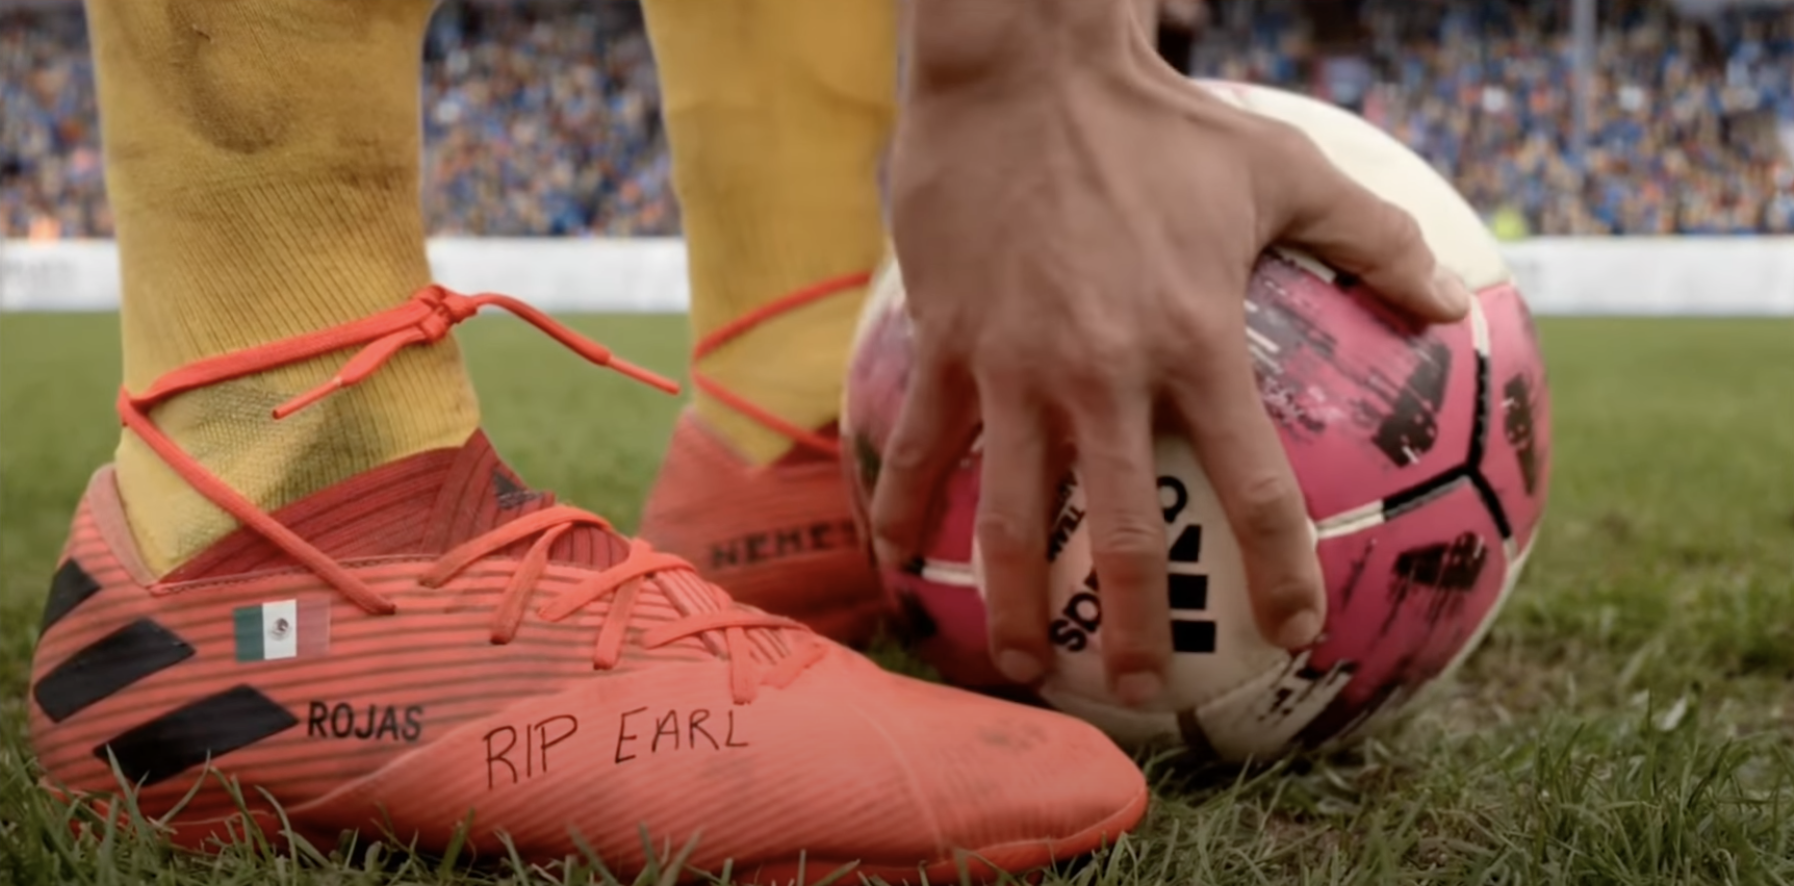 &quot;RIP EARL&quot; written on Dani&#x27;s cleats with black marker